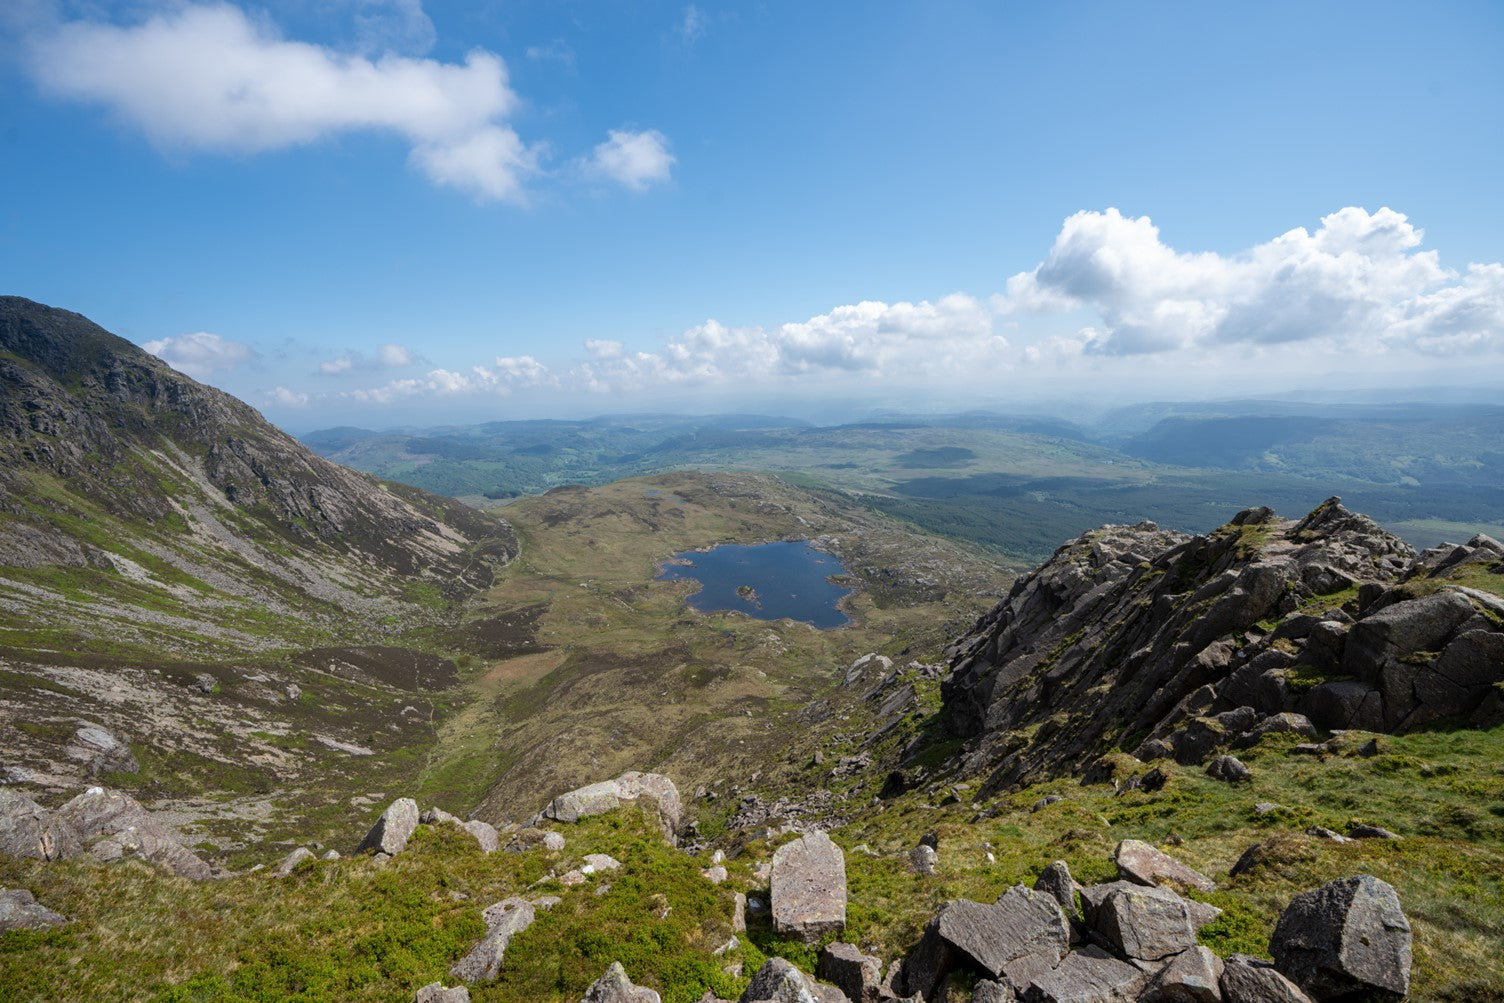 Moel Siabod; a spectacular ridge hike on a lonely Snowdonia mountain